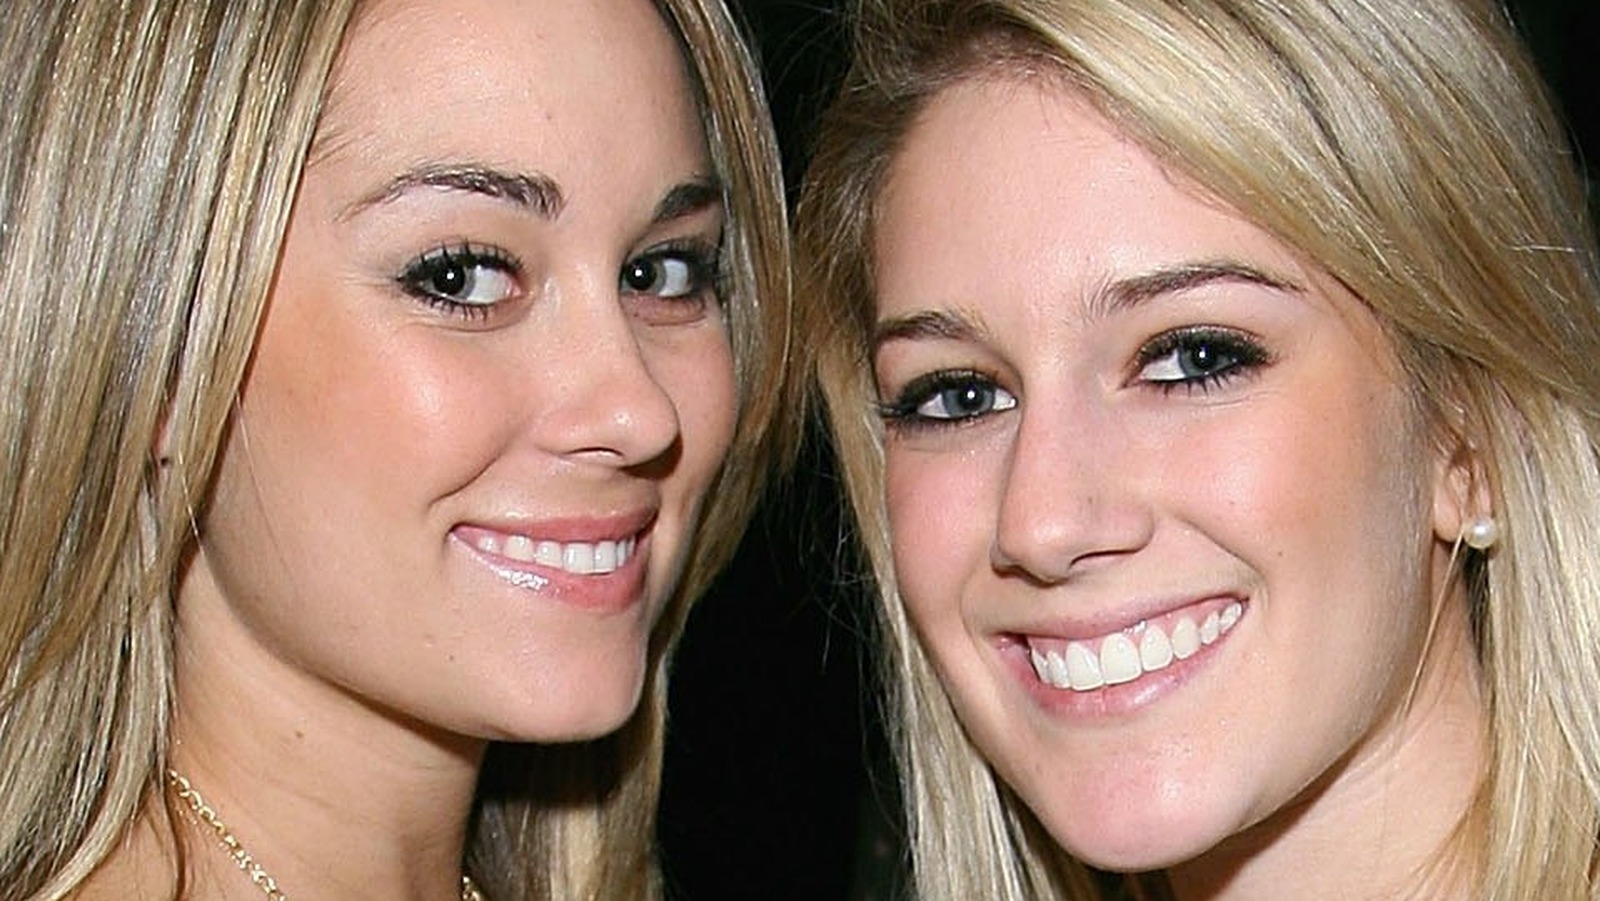 10 Years Later, Lauren Conrad Is Returning to The Hills